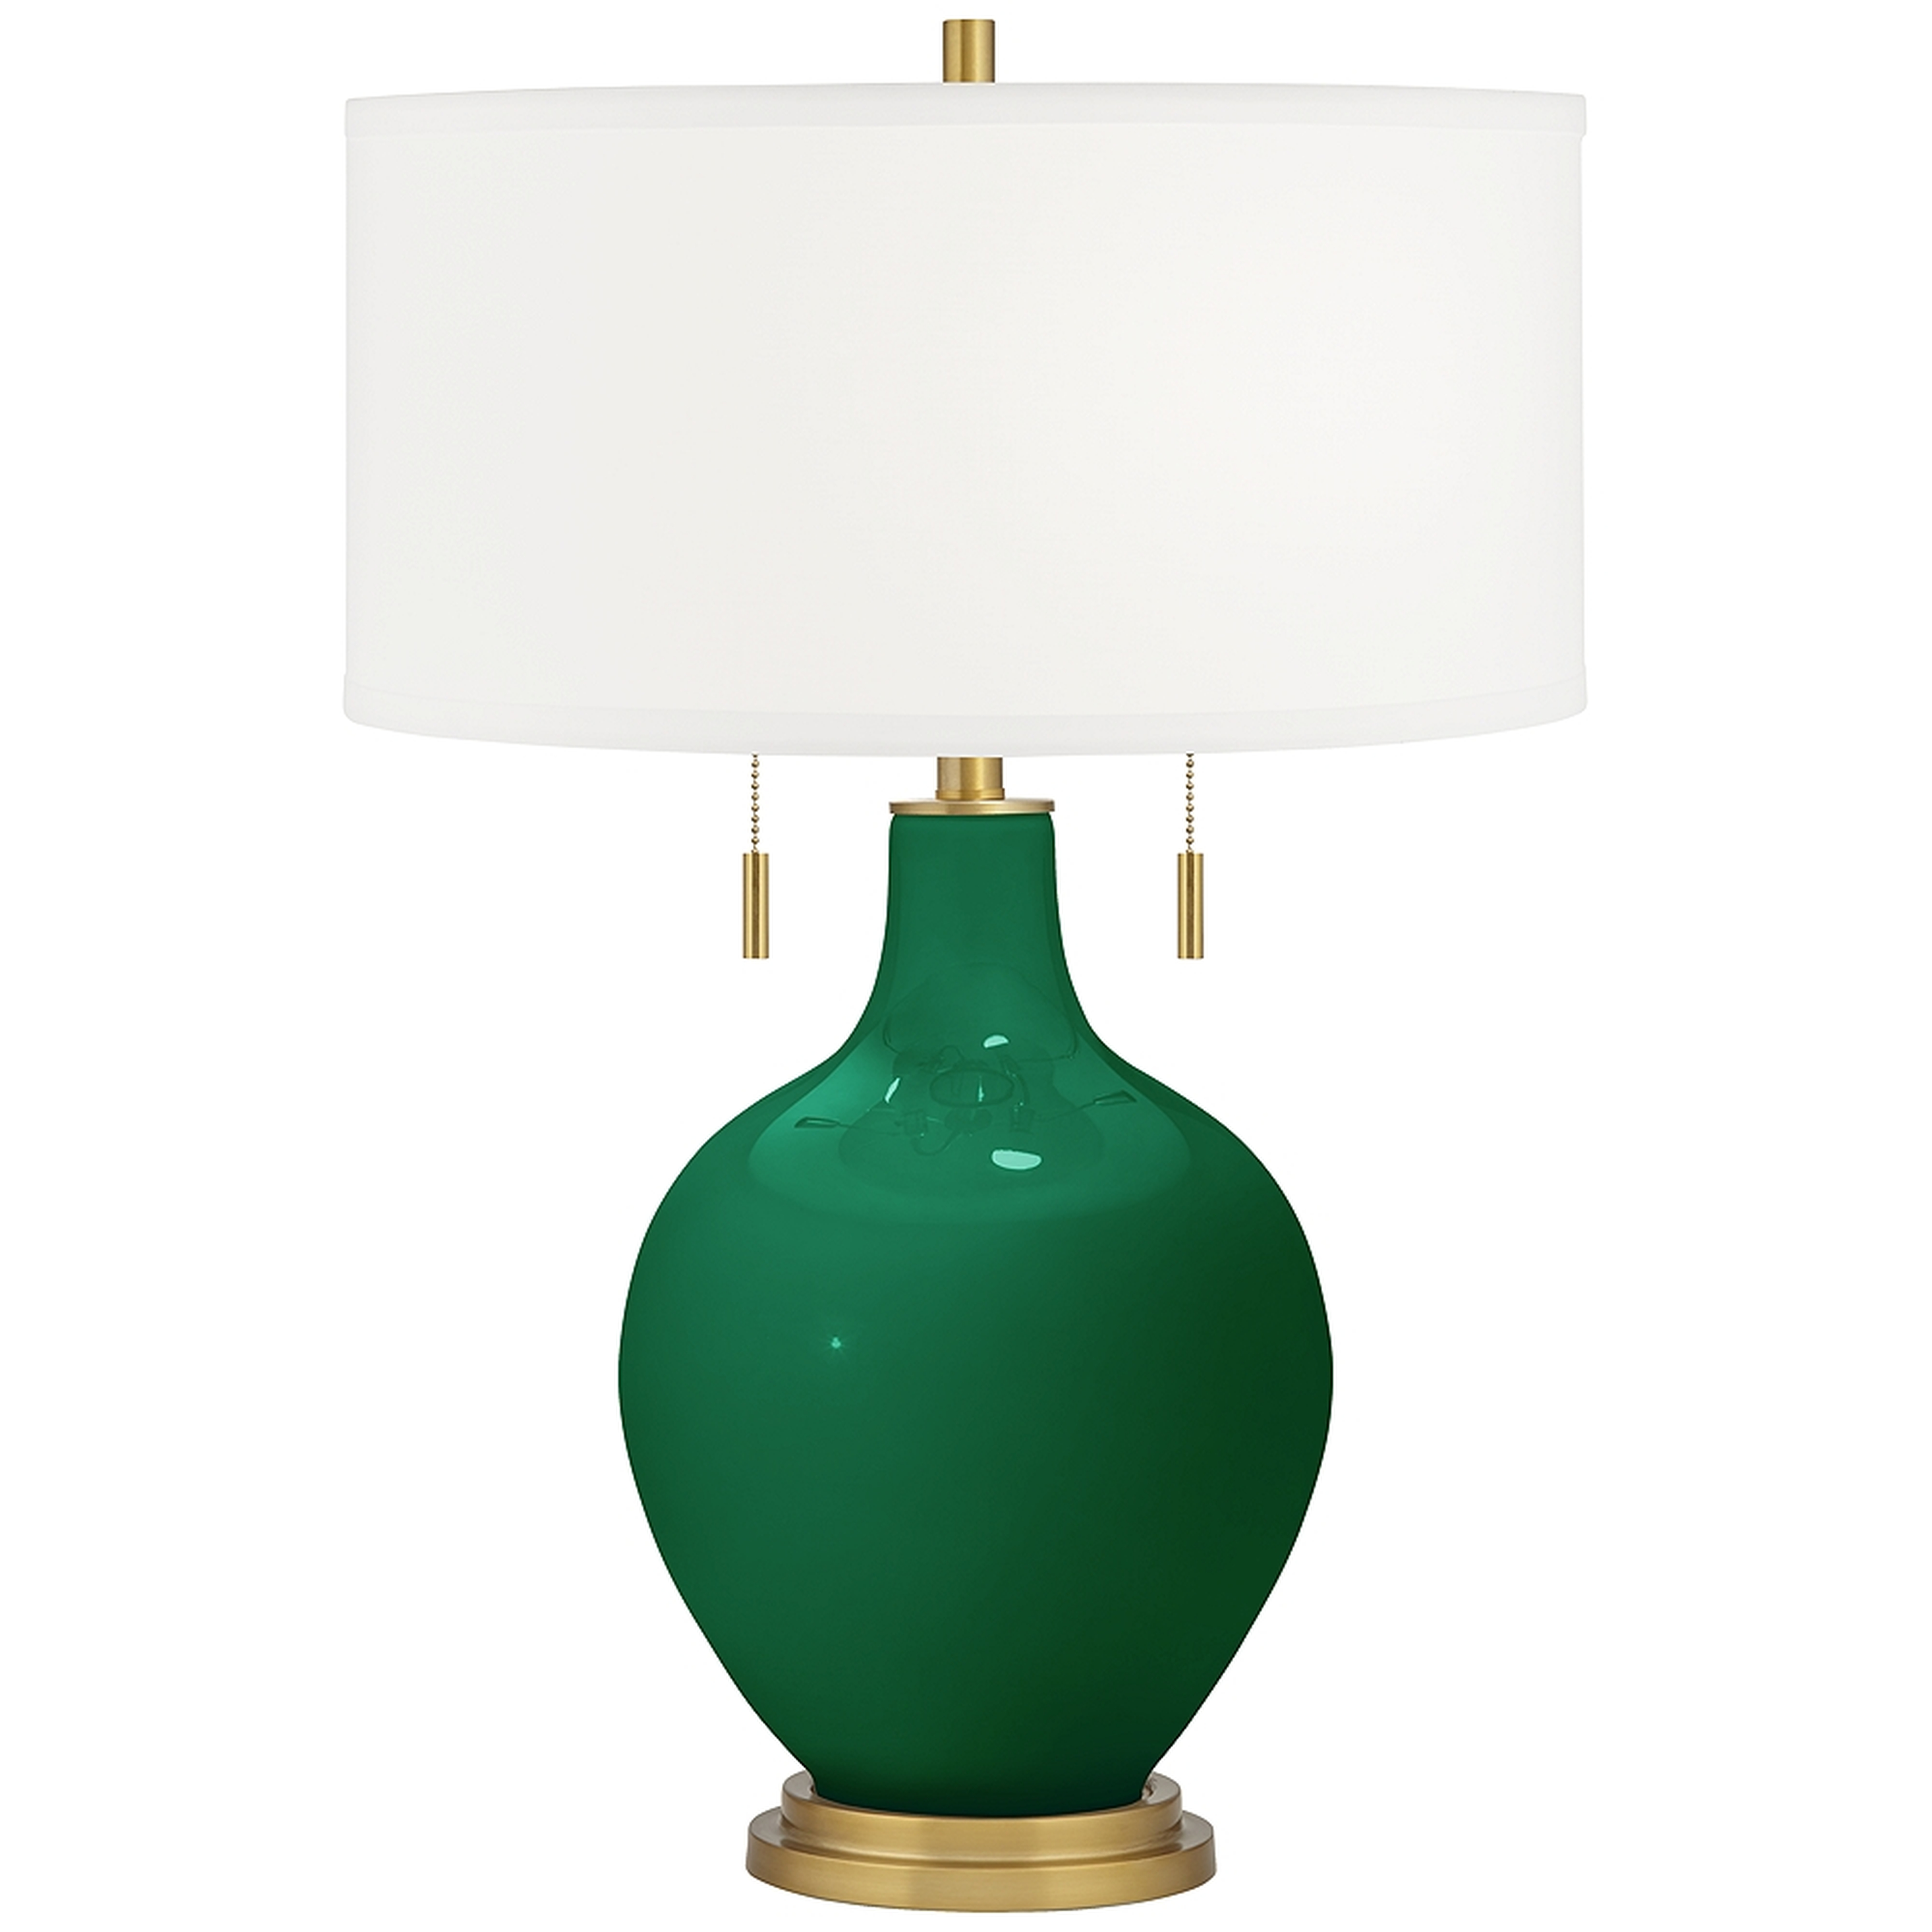 Greens Toby Brass Accents Table Lamp - Style # 95P97 - Lamps Plus